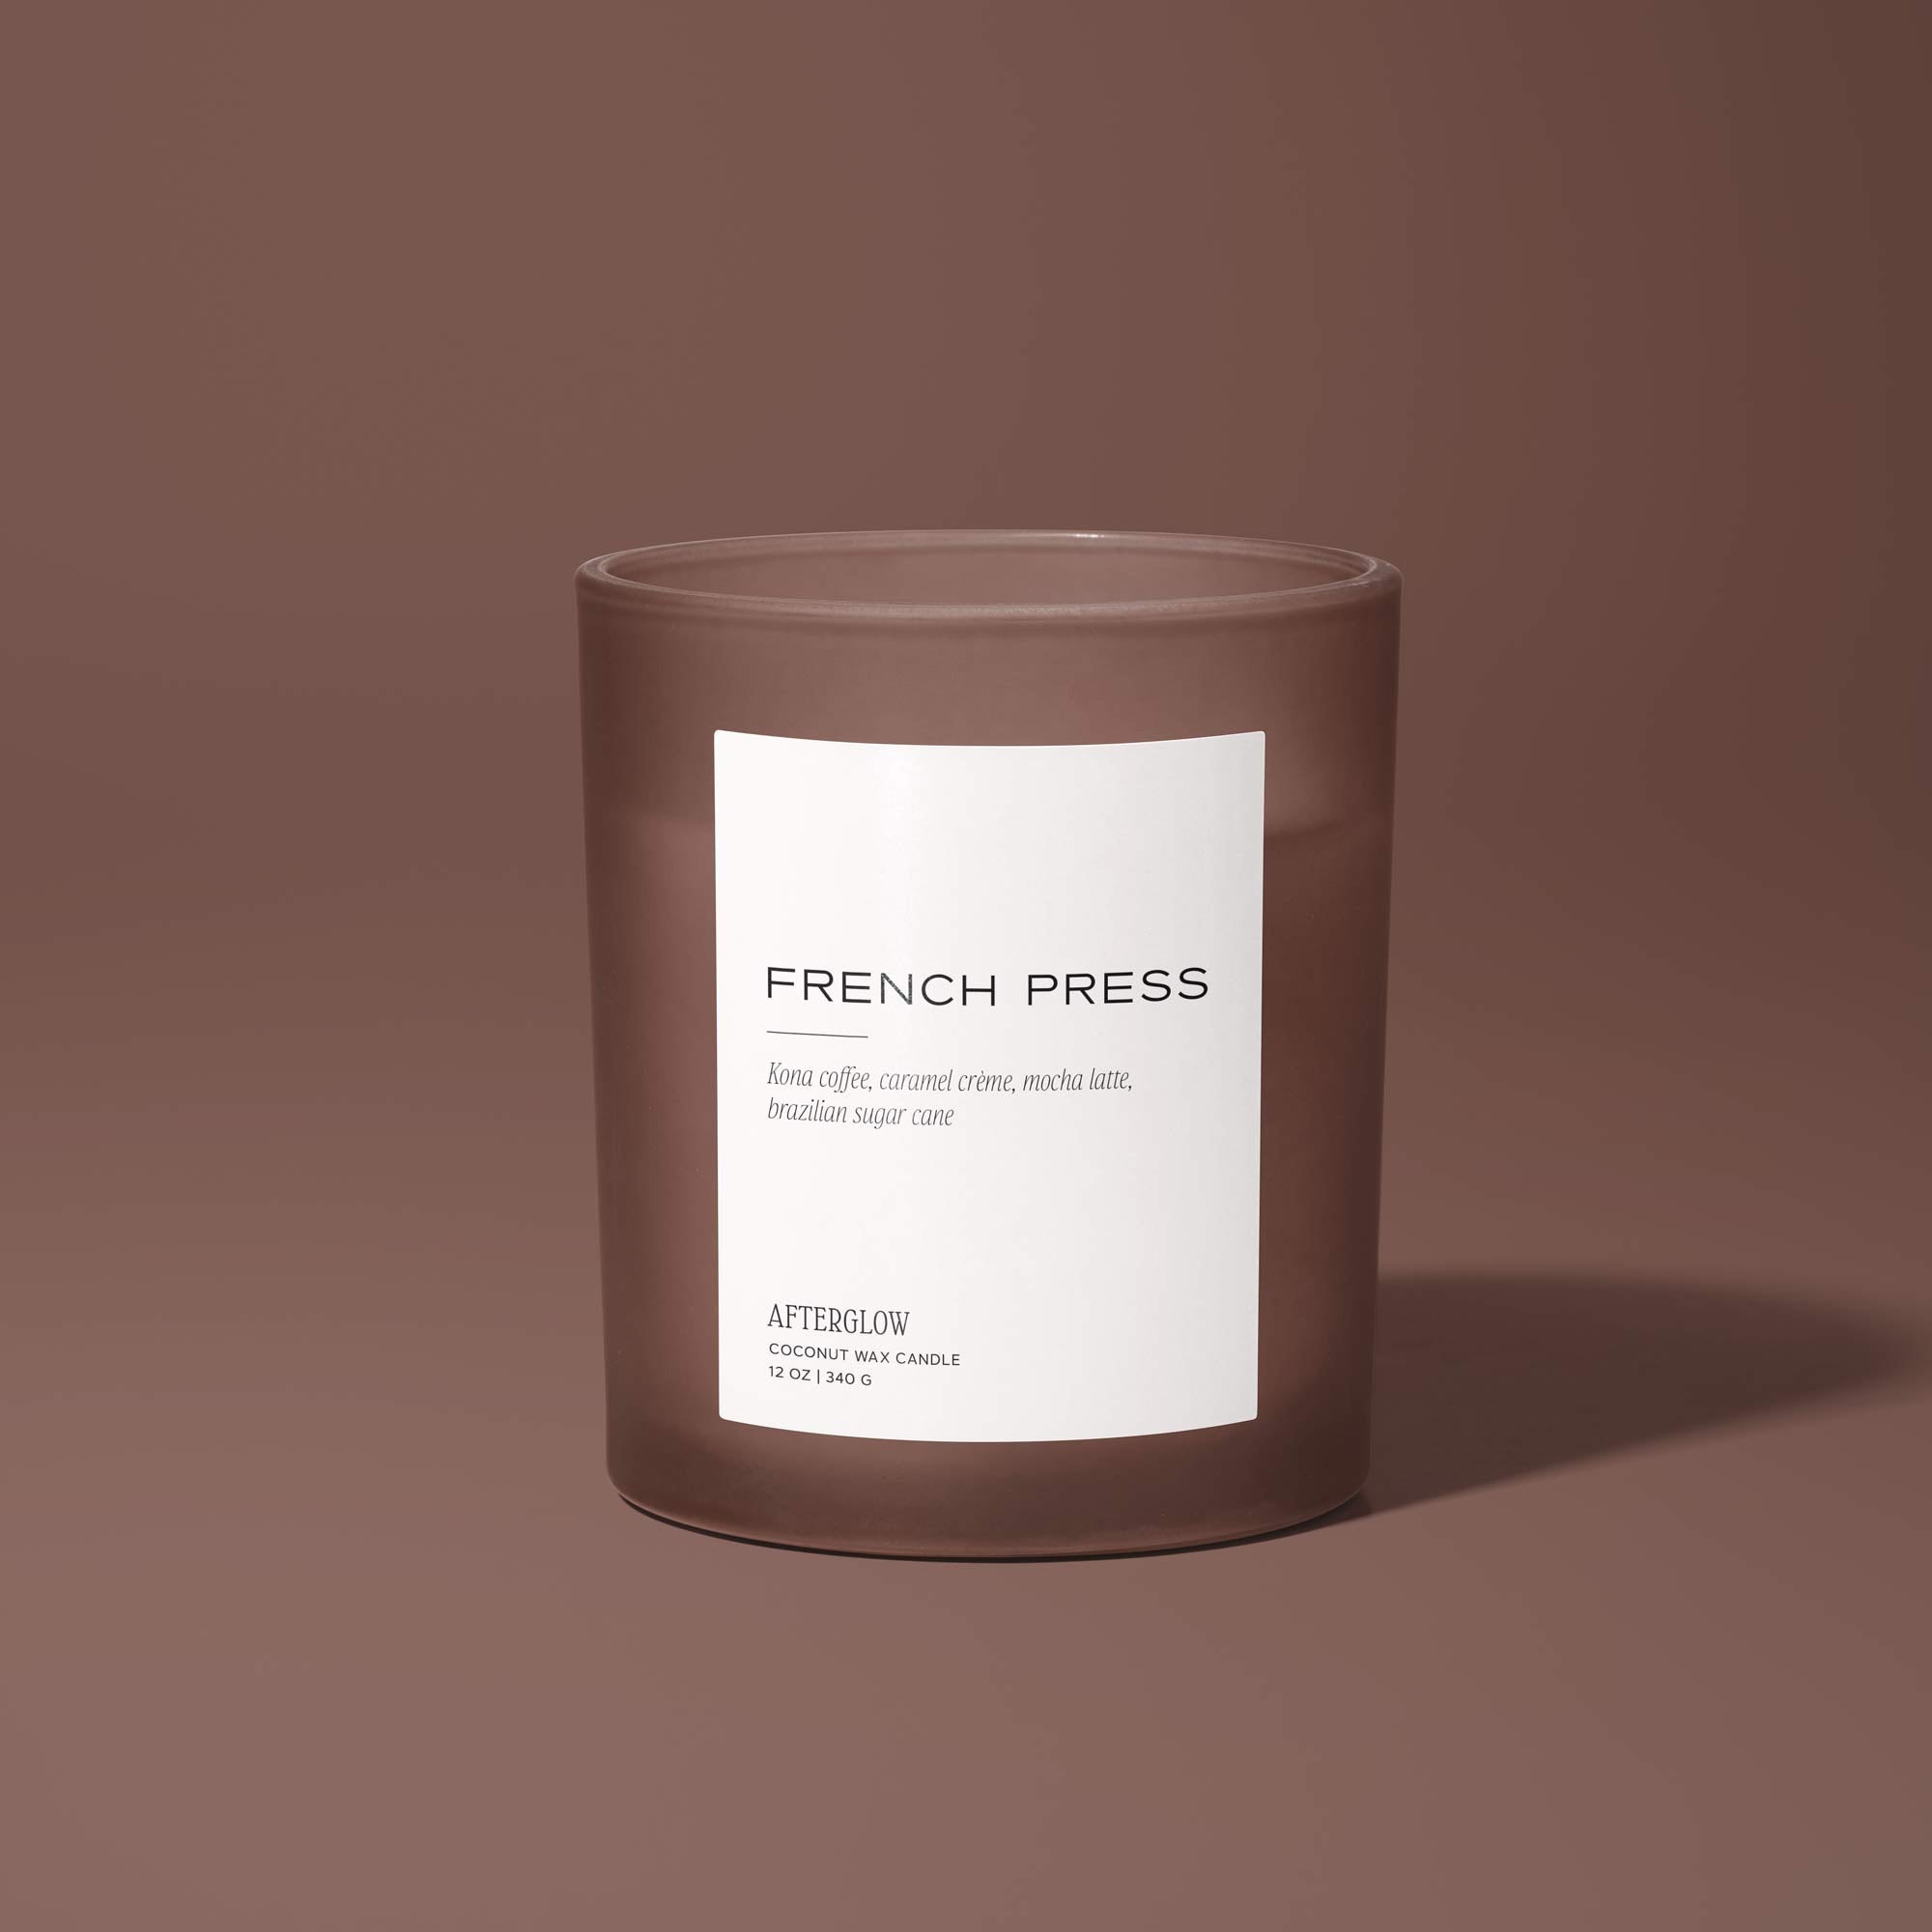 Afterglow's French Press jar candle with a brown background